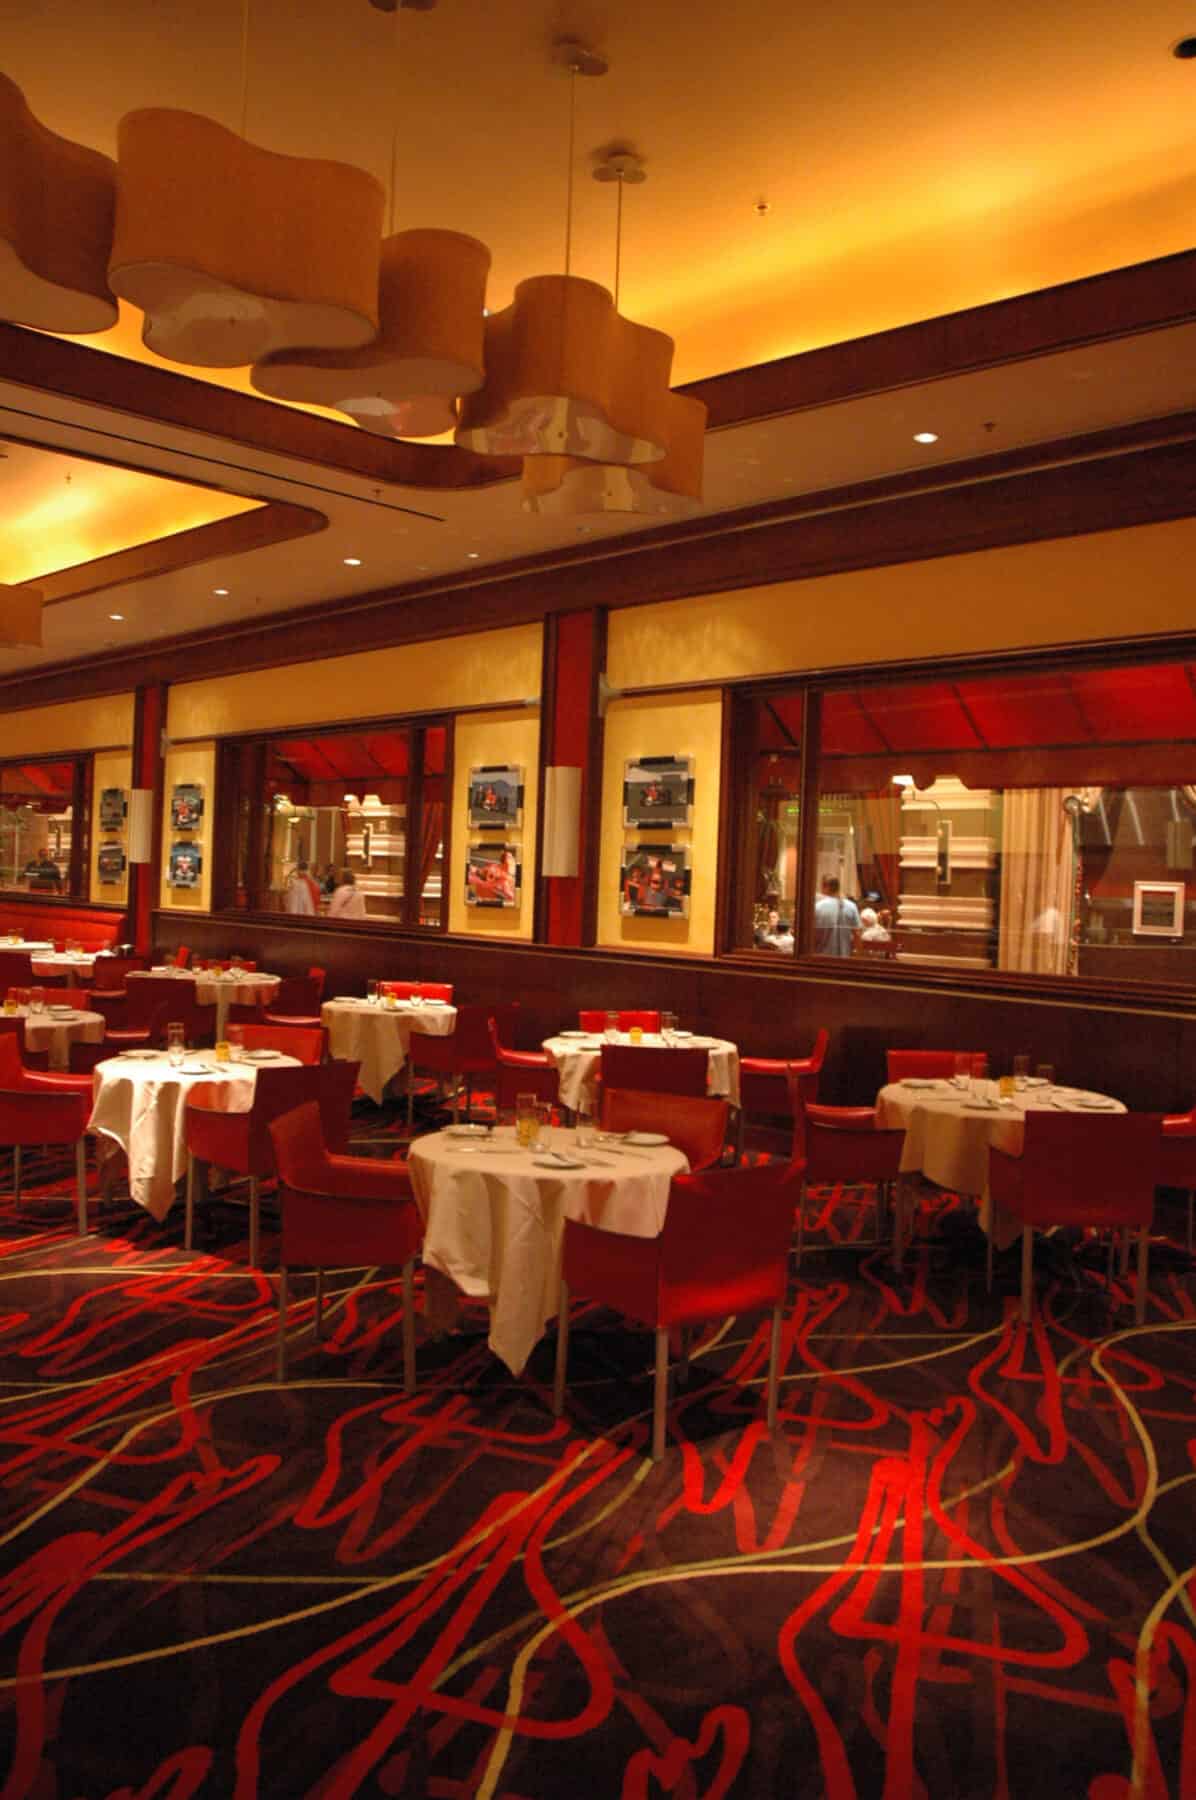 Custom Flooring and Wall Finishes for Restaurant at Wynn Hotel Remodel by Commercial Builder & General Contractor Structural Enterprises